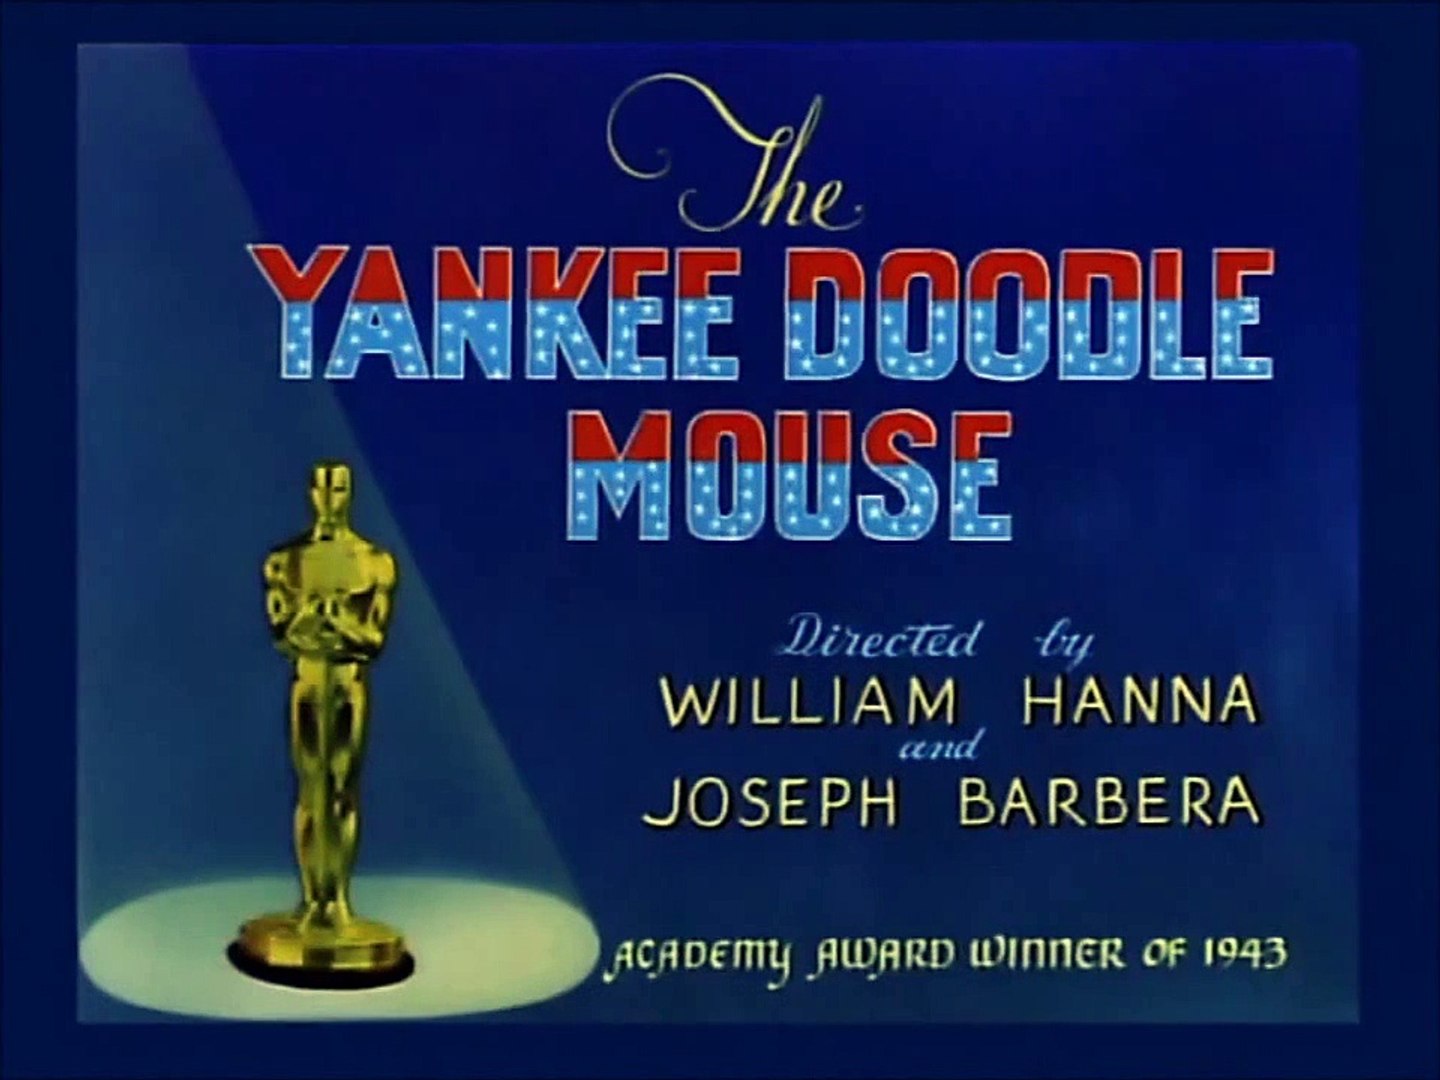 Tom and Jerry, 11 Episode The Yankee Doodle Mouse (1943)